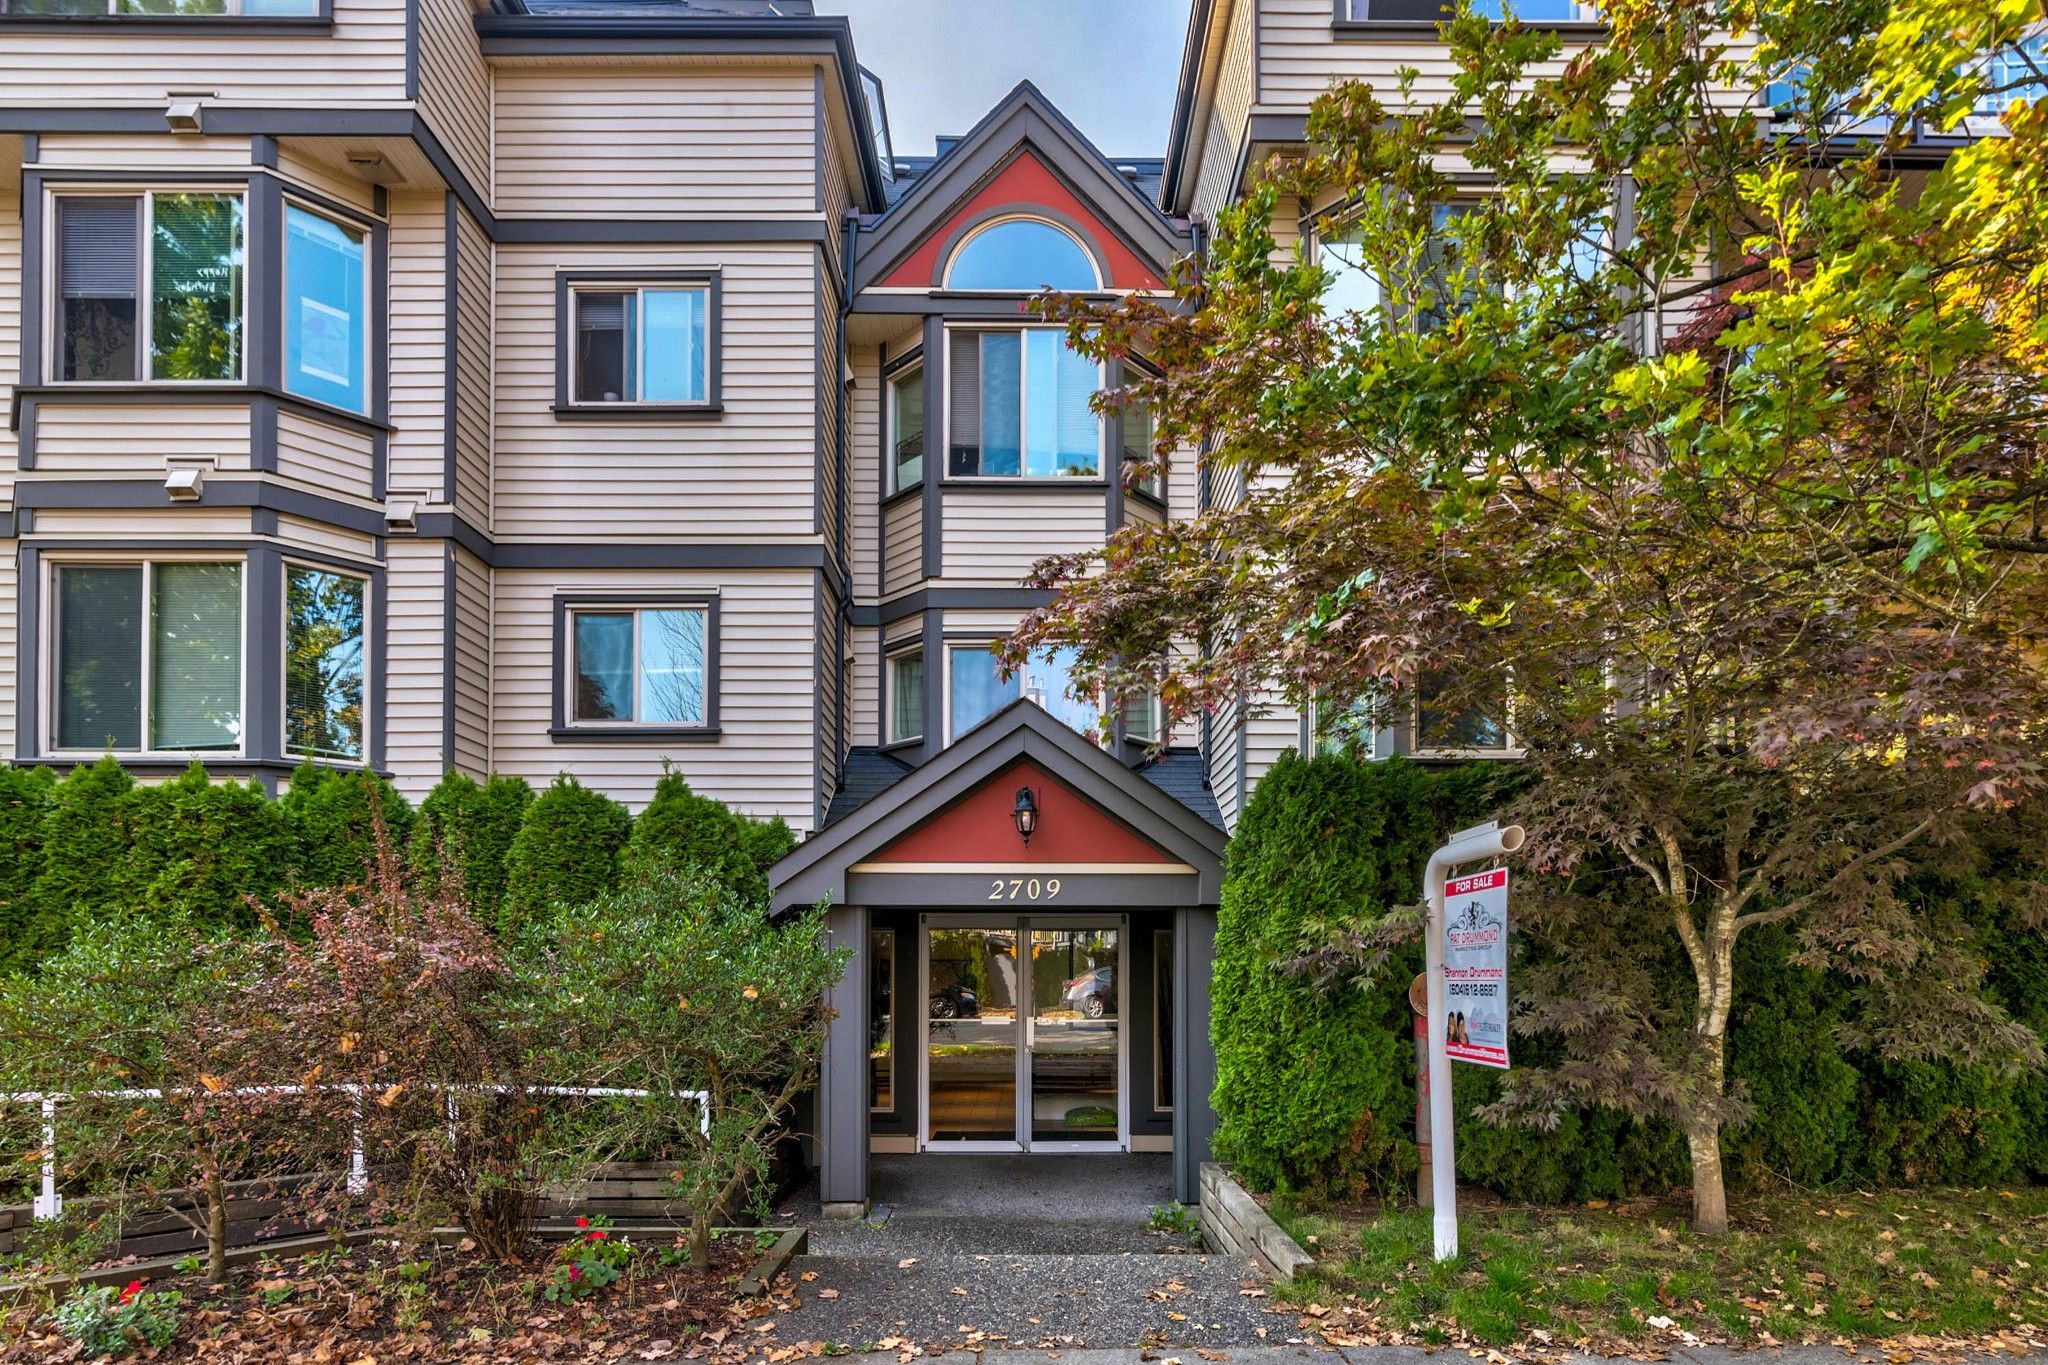 Photo 2: Photos: 103 2709 Victoria Drive in Vancouver: Grandview Woodland Condo for sale (Vancouver East)  : MLS®# R2504262